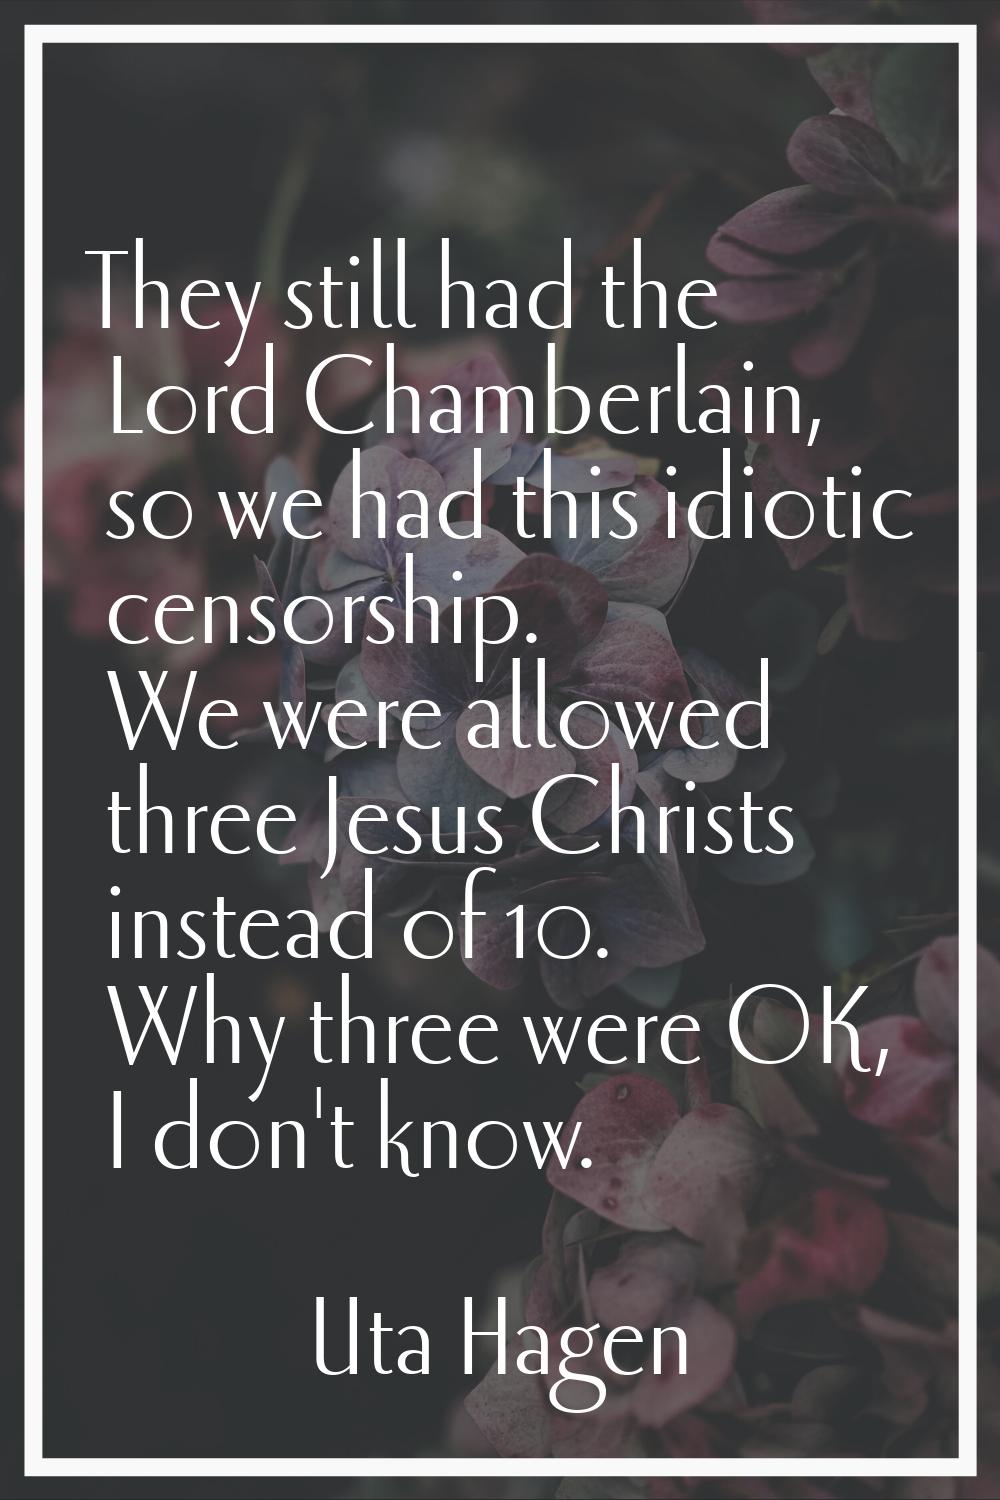 They still had the Lord Chamberlain, so we had this idiotic censorship. We were allowed three Jesus